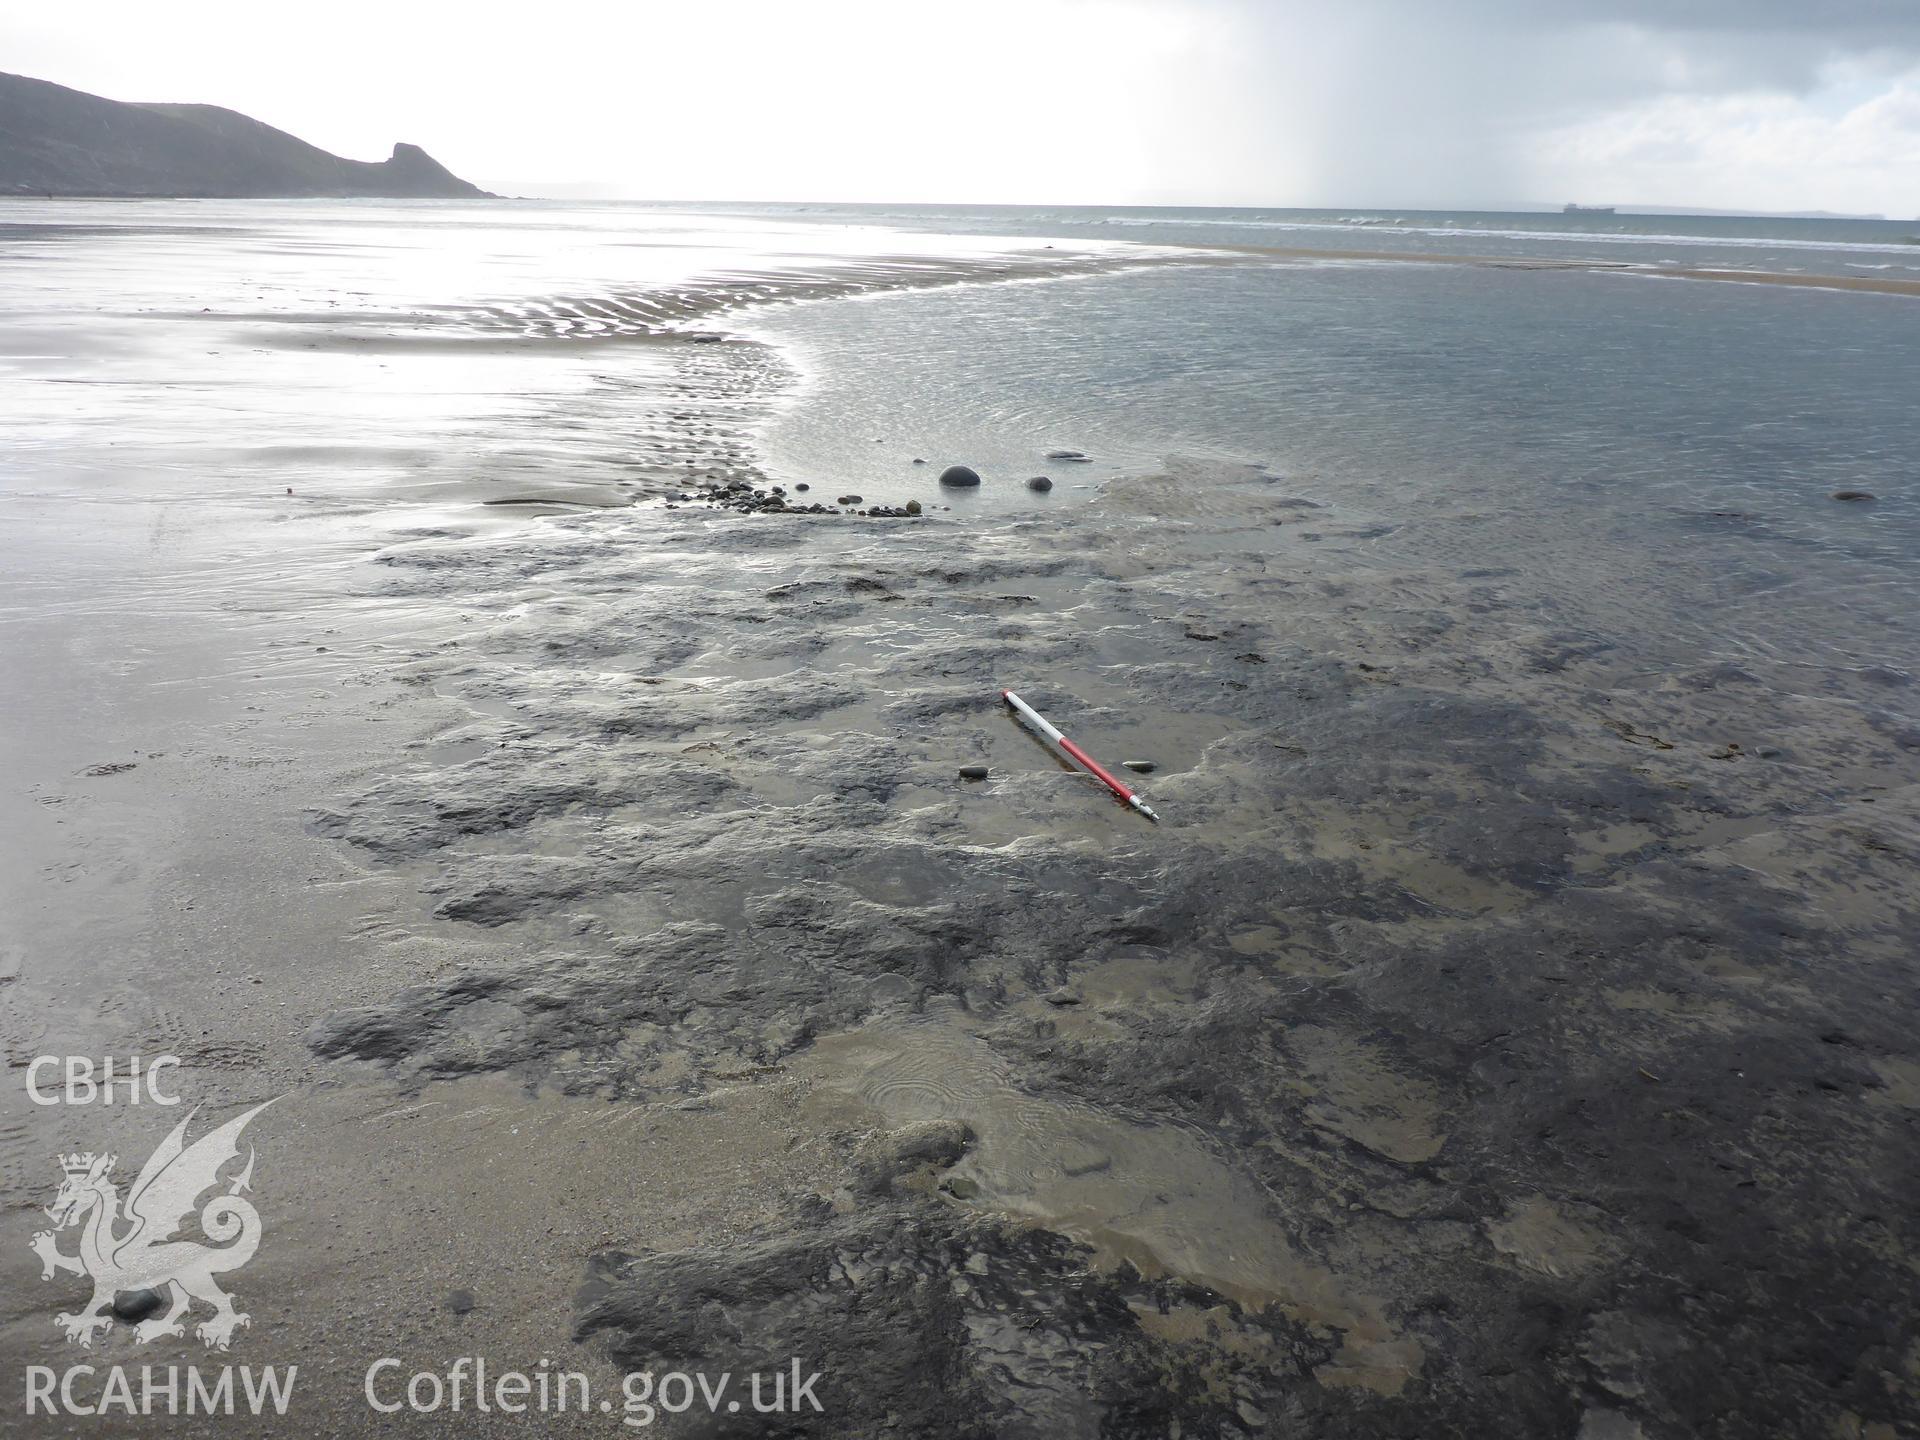 Peat exposure at the southern end of Newgale Beach. View looking south.